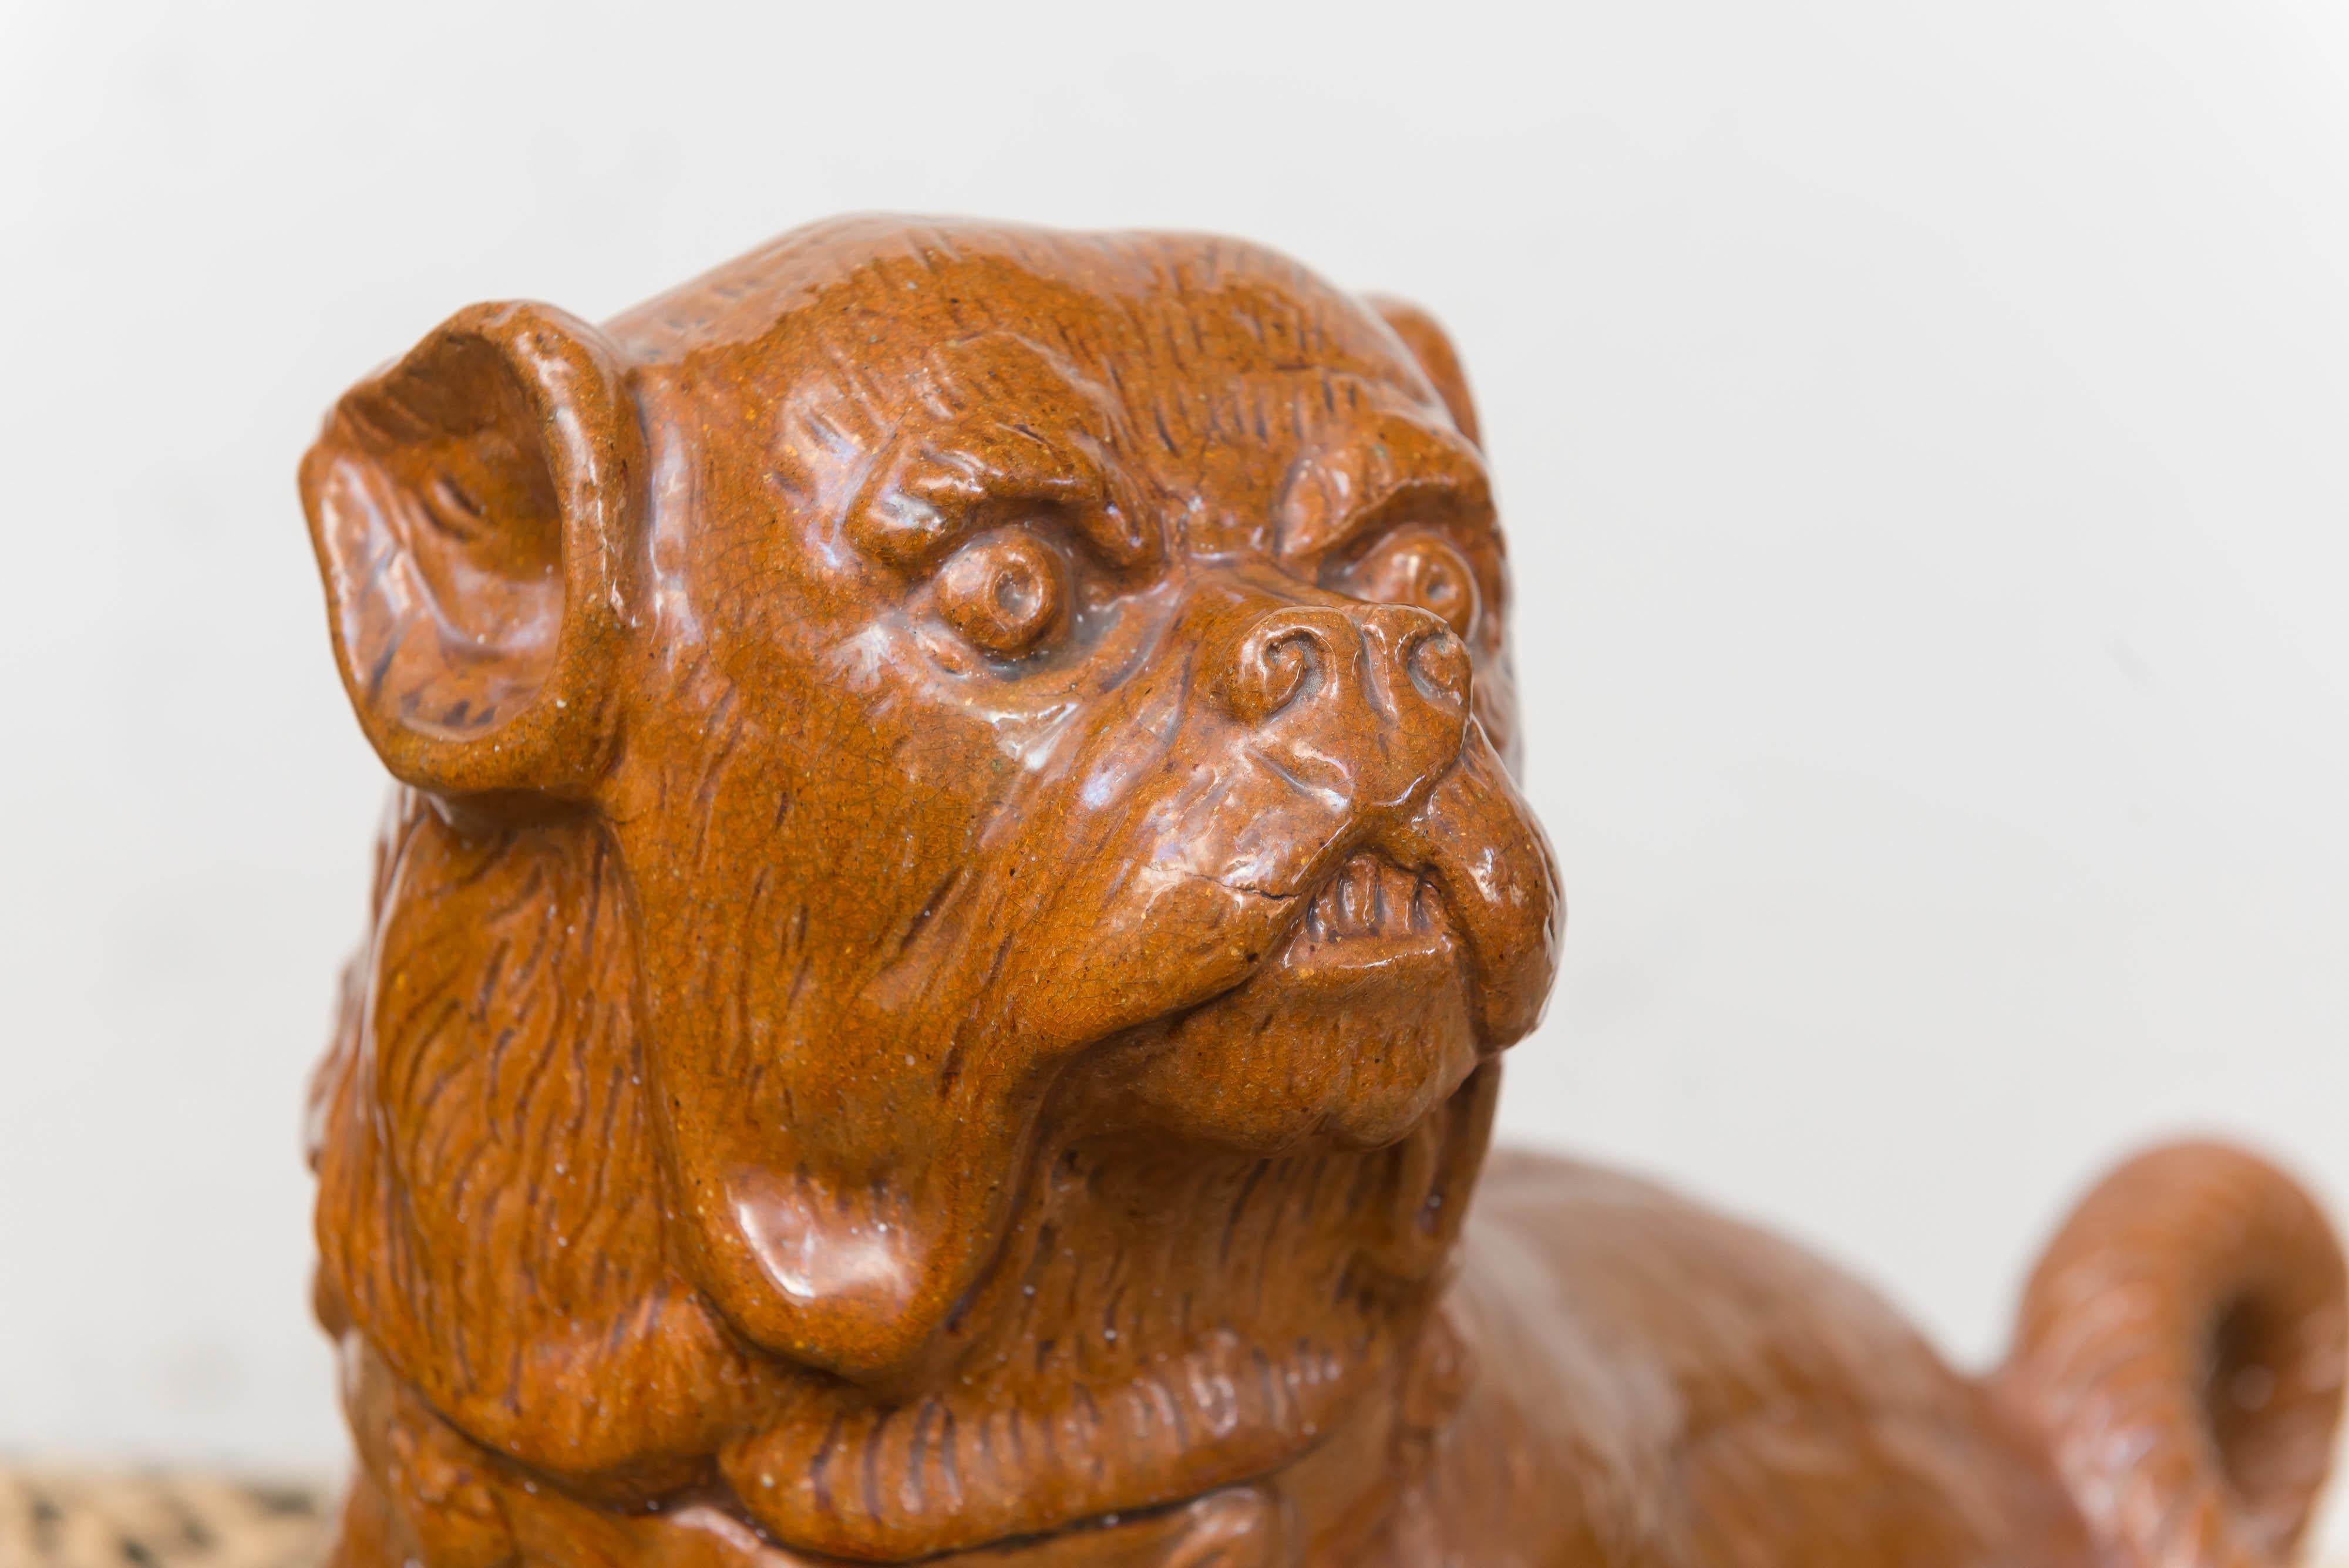 Late 19th century German pug dog. Heavy terracotta with brown carmel color glaze.
Seated, with the head turned, in active pose. Good confirmation and details of the face, ears, coiled tail with a bold collar. The base in the form of a cushion with